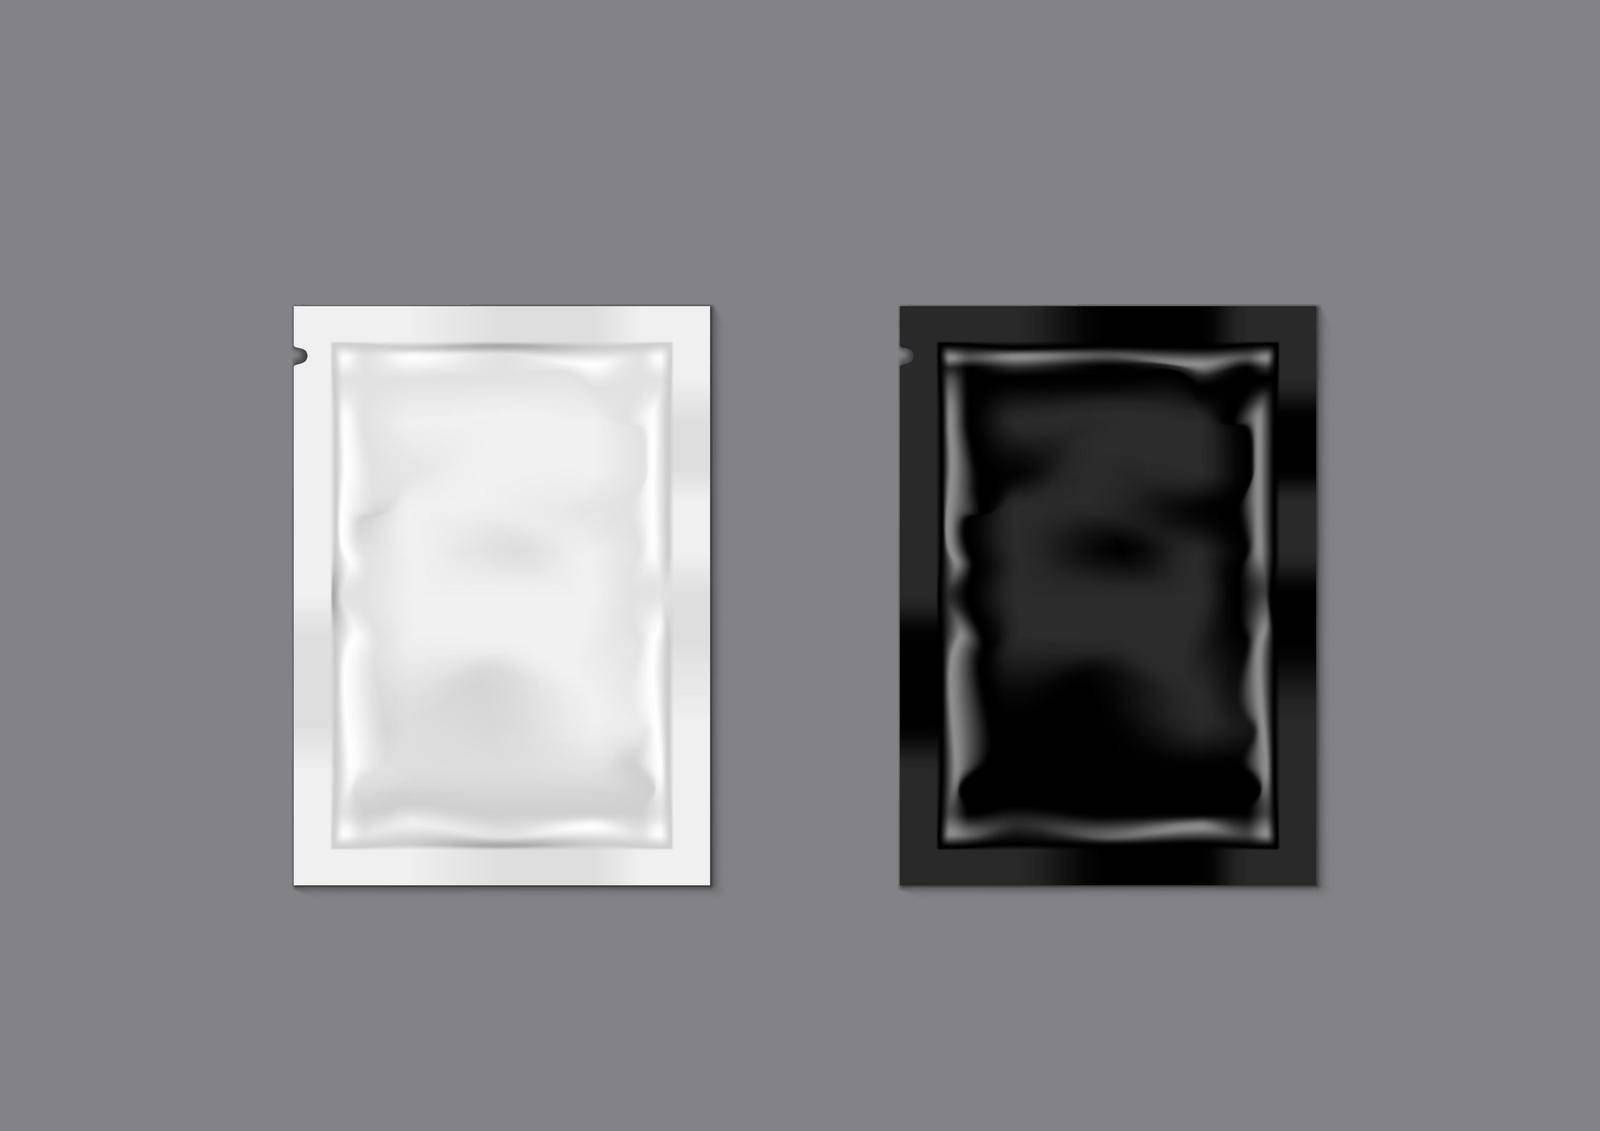 Blank Black And White Mini Sachet Packet by VectorThings